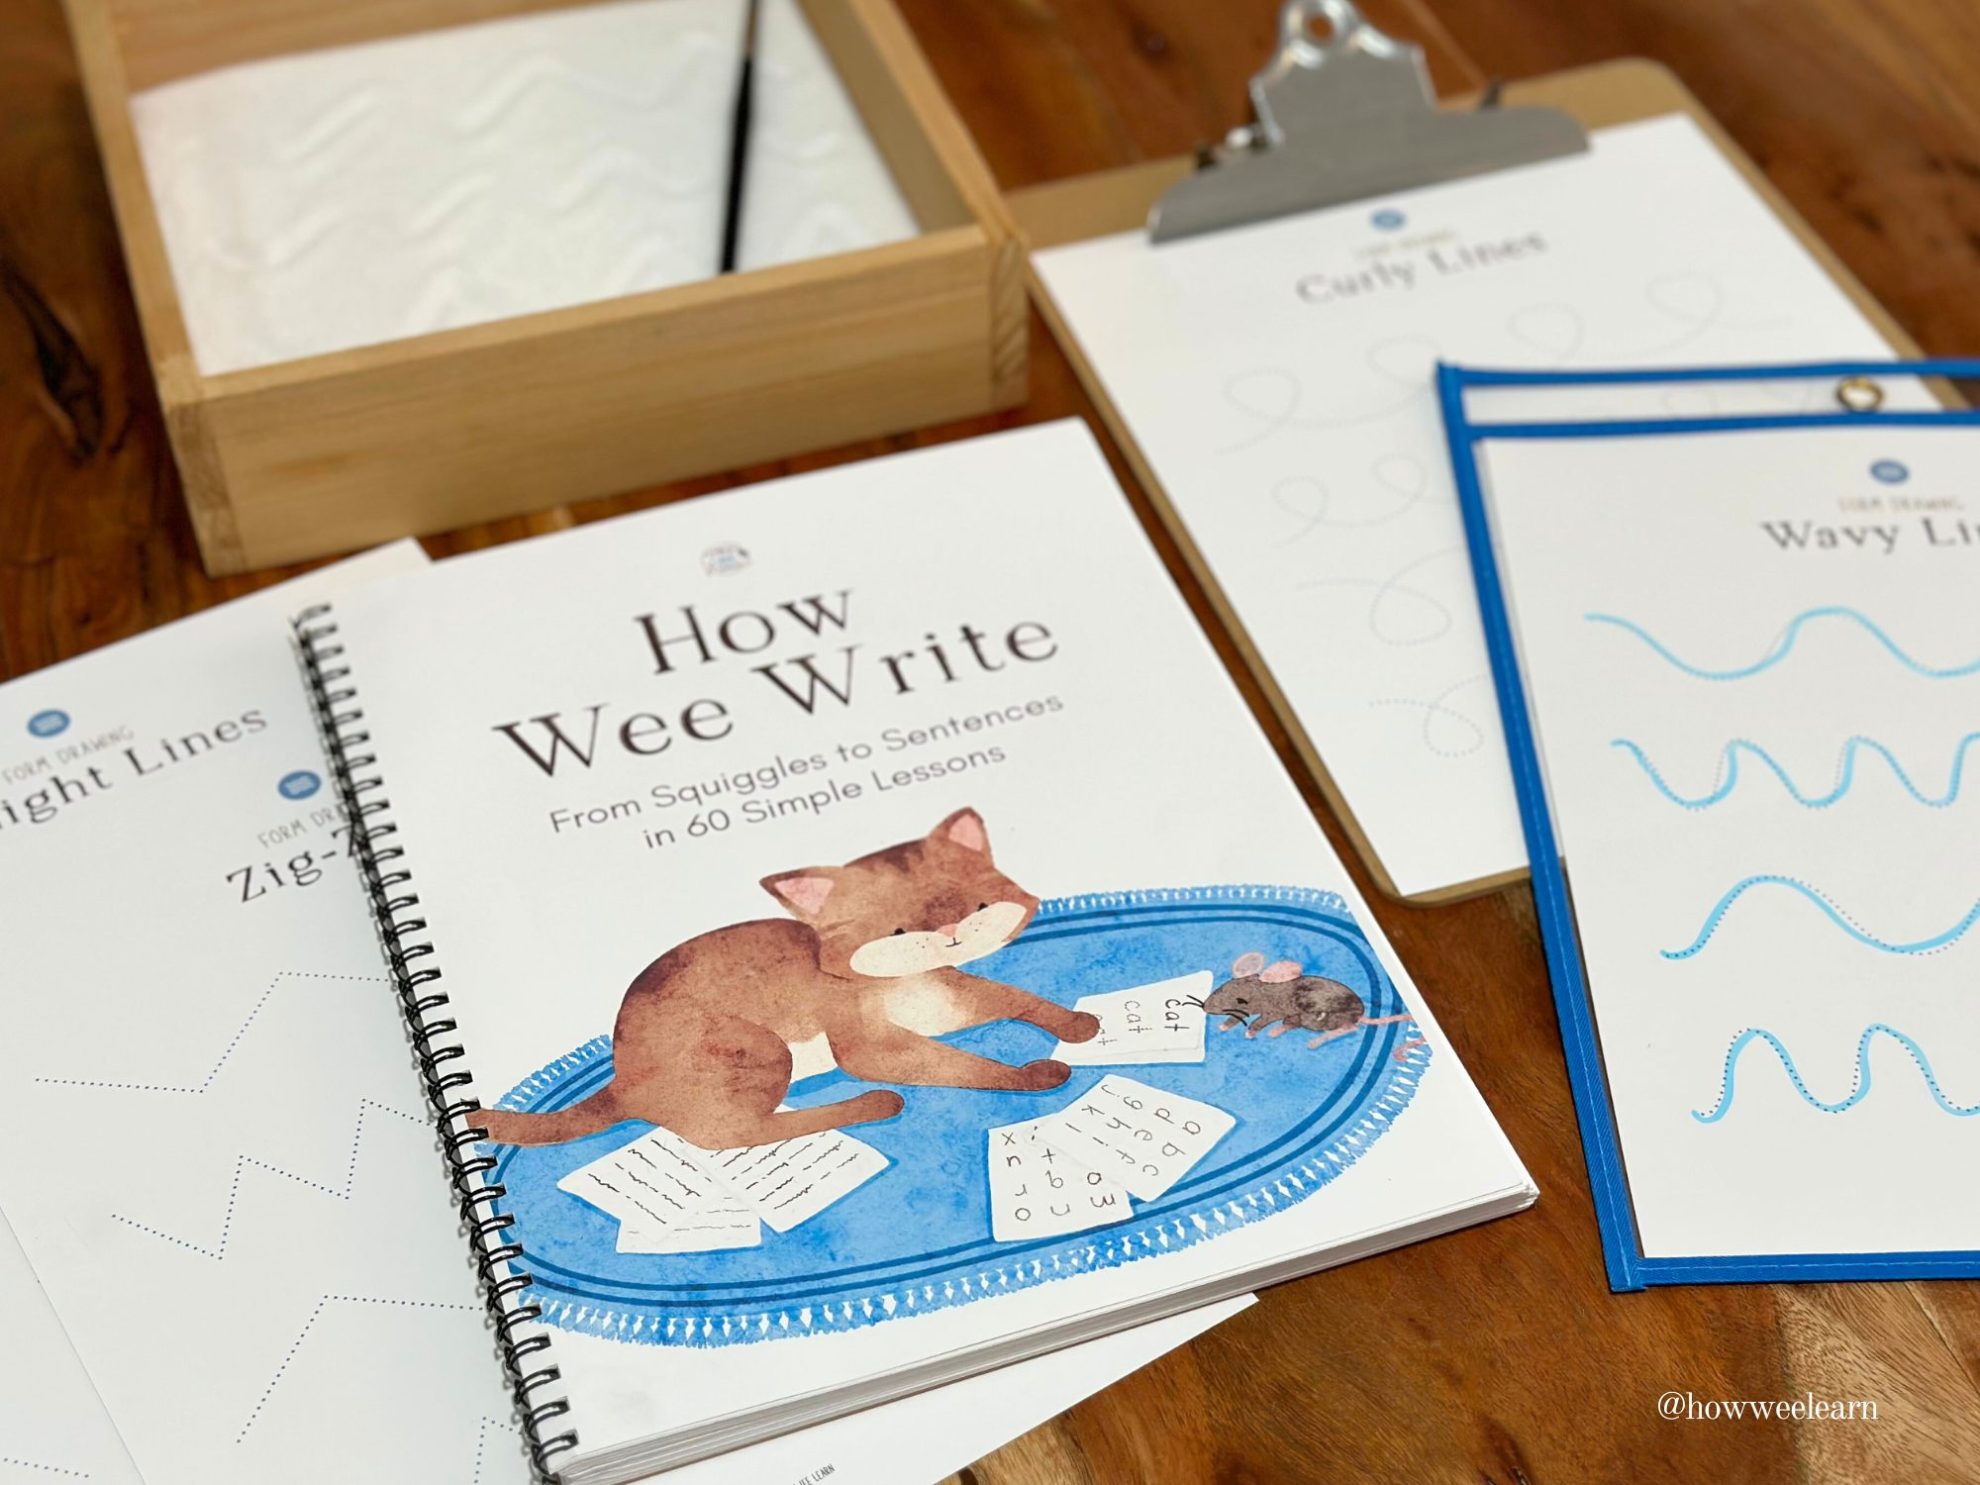 How Wee Write Form Drawing Printable, Wavy Lines